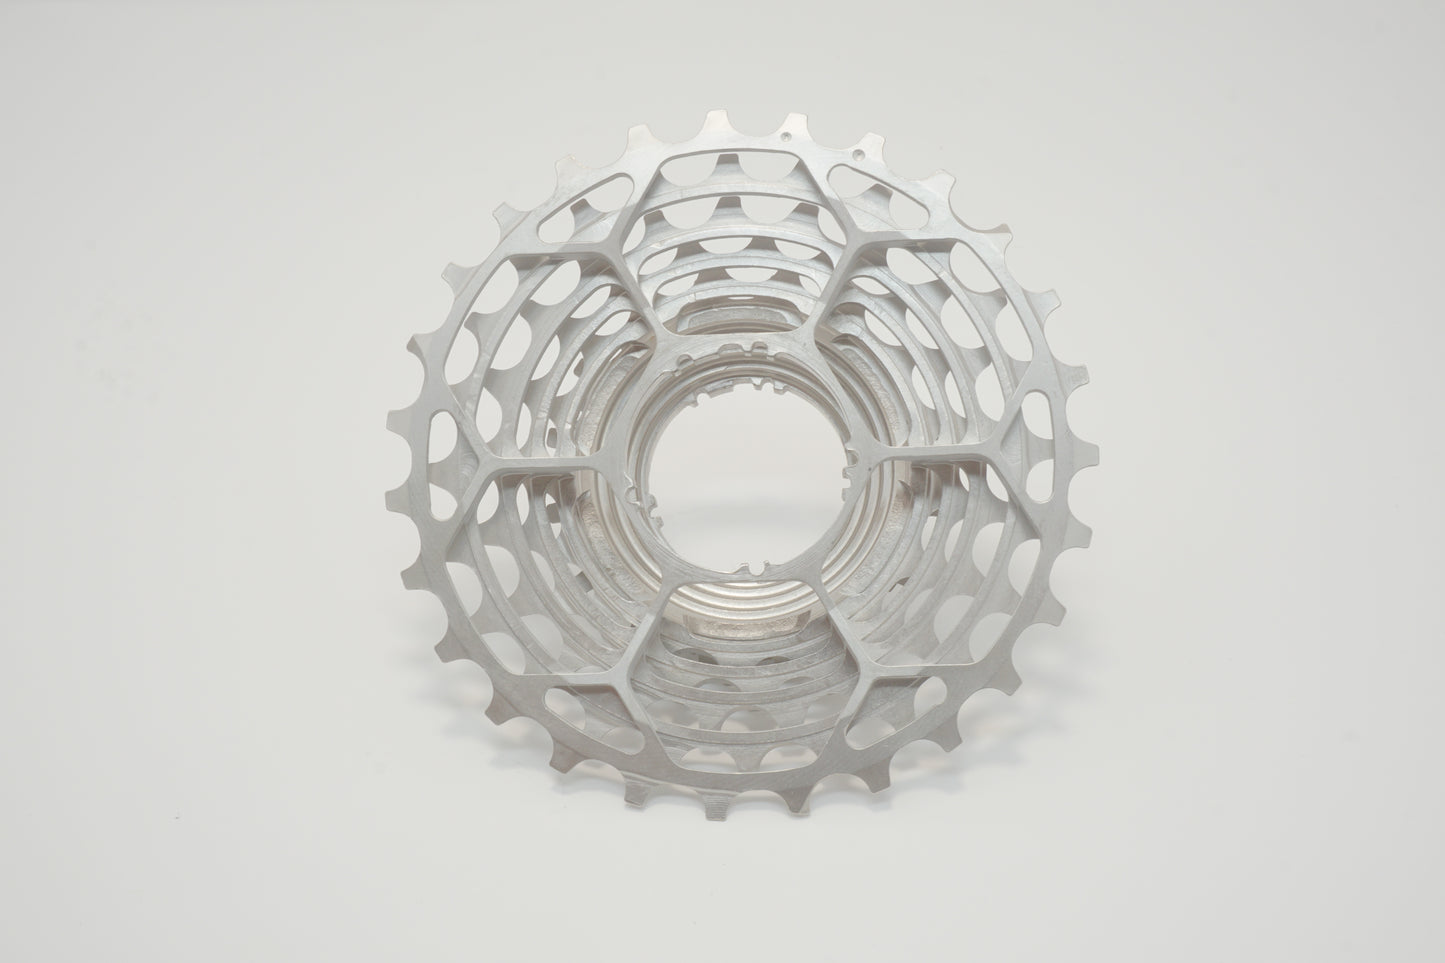 Prestacycle UniBlock PRO Cassette - 11-Speed for Shimano / SRAM / Campagnolo on HG12 / HG11 / HG10 Freehub